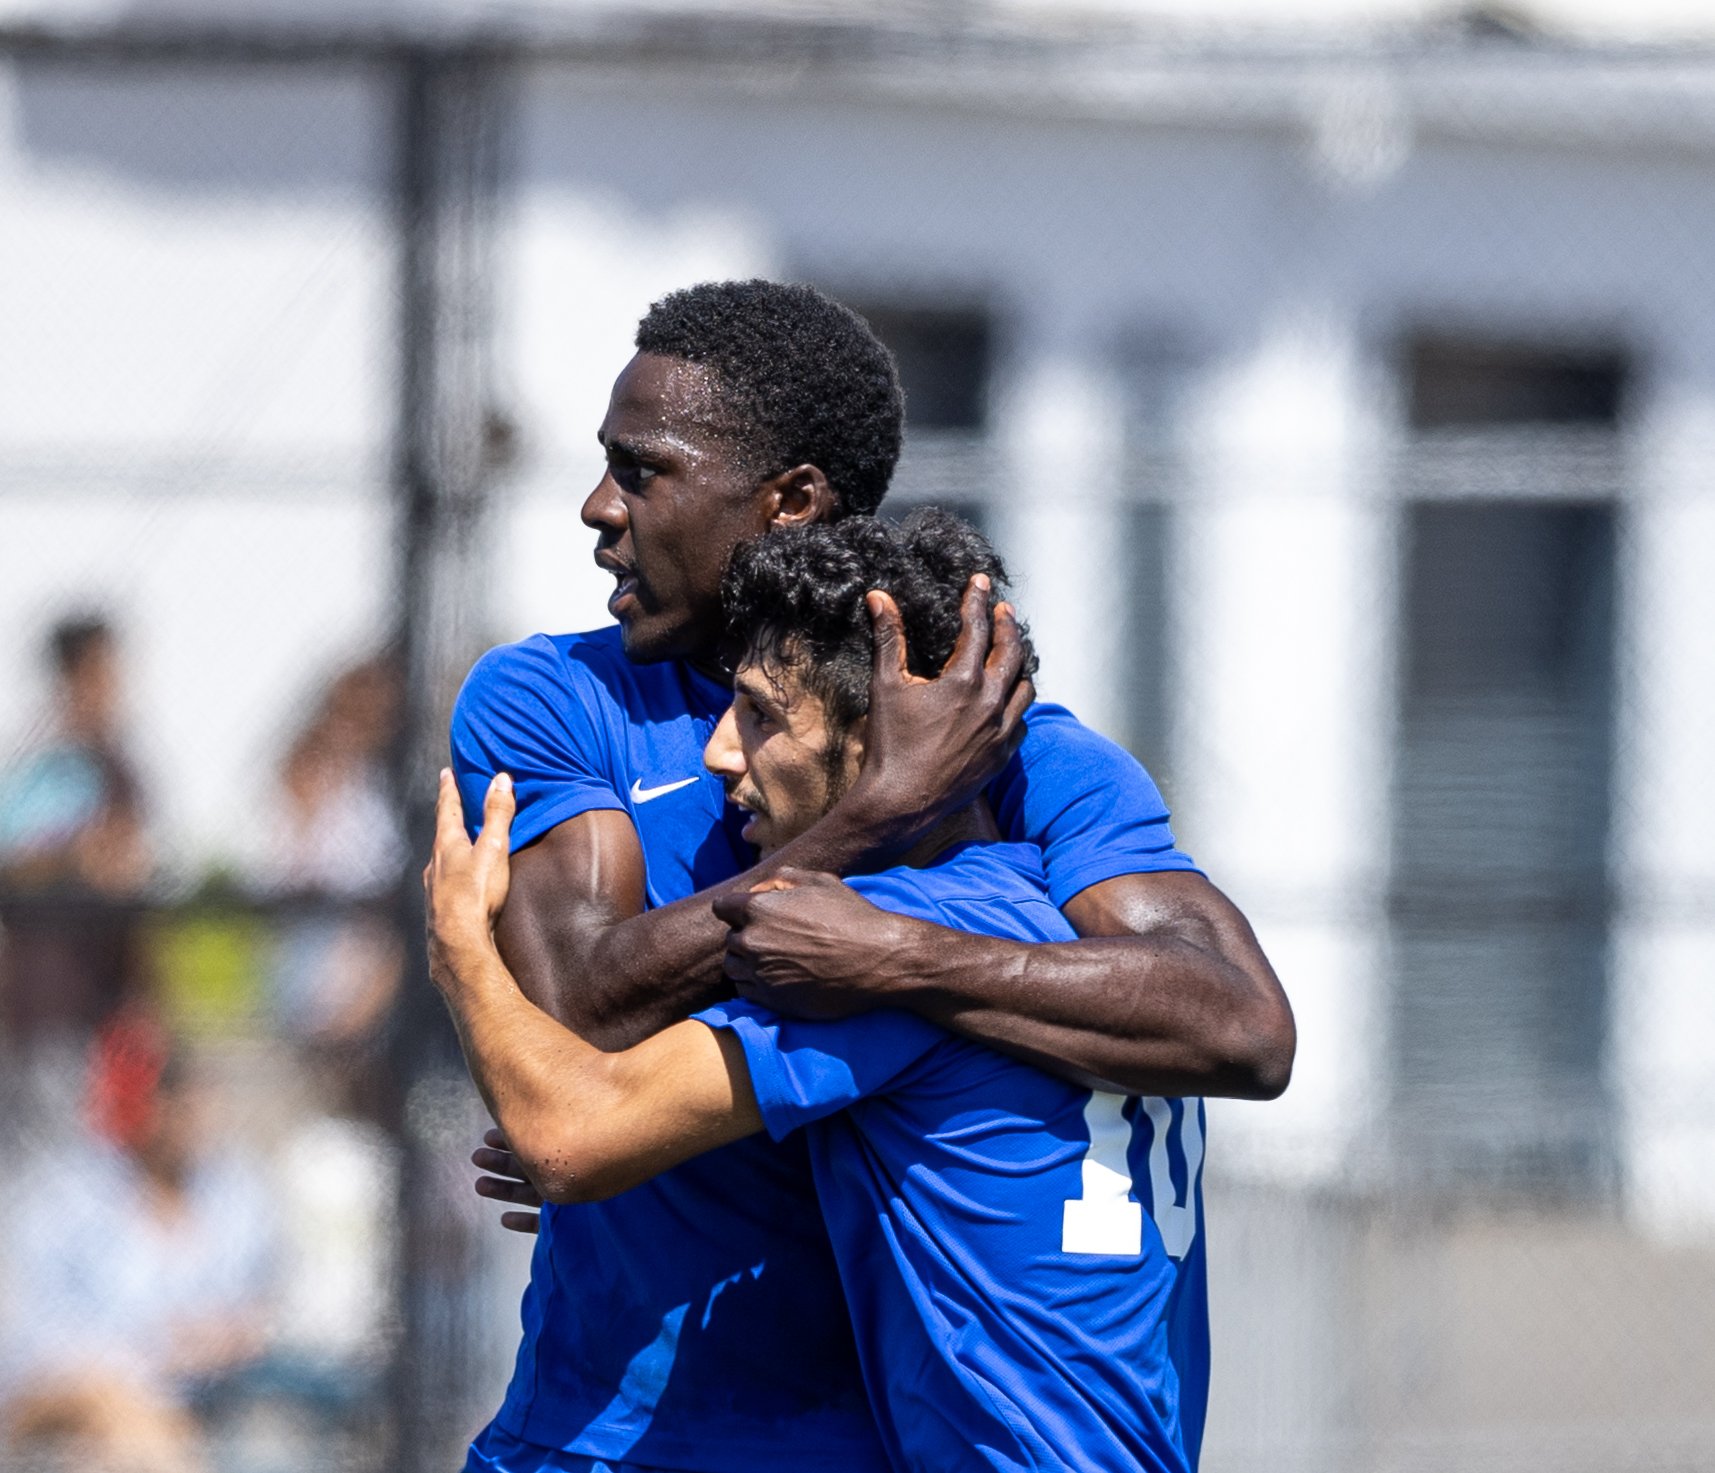  Santa Monica College men's soccer forward Philip Hephzibah(L) and midfielder Roey Kivity(R) hugging after Kivity scores a goal during their match against Norco College on Tue. Sept. 12 on Corsair Field at Santa Monica, Calif. (Danilo Perez | The Cor